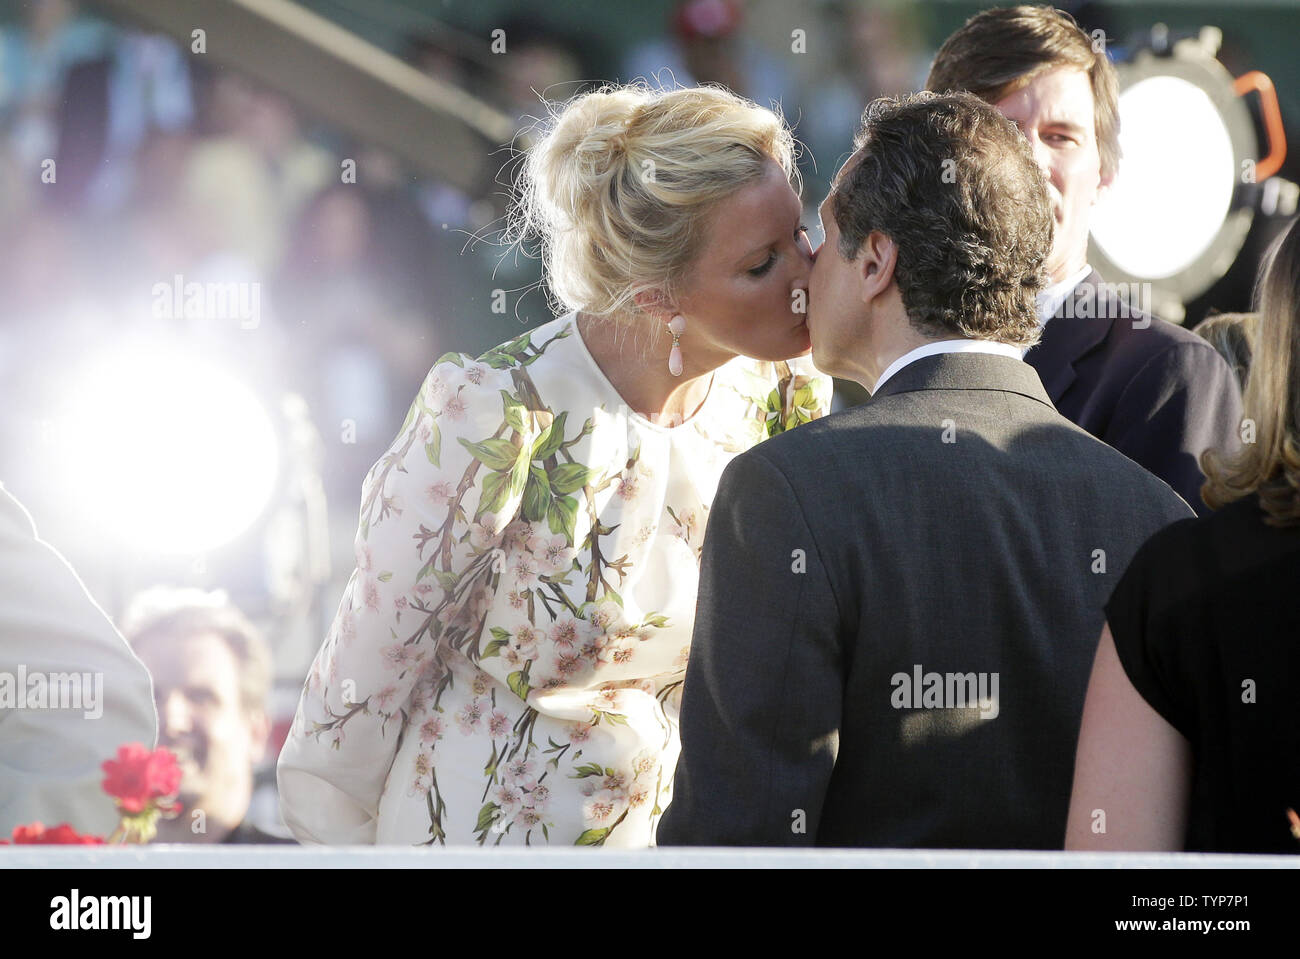 Governor Andrew Cuomo kisses girlfriend Sandra Lee on the TV platform after Tonalist beat Commissioner by a head at the finish and wons the 146th running of the Belmont Stakes in Elmont New York on June 7, 2014. California Chrome came in fourth place and failed to become the first horse in 36 years to win the Triple Crown.      UPI/John Angelillo Stock Photo